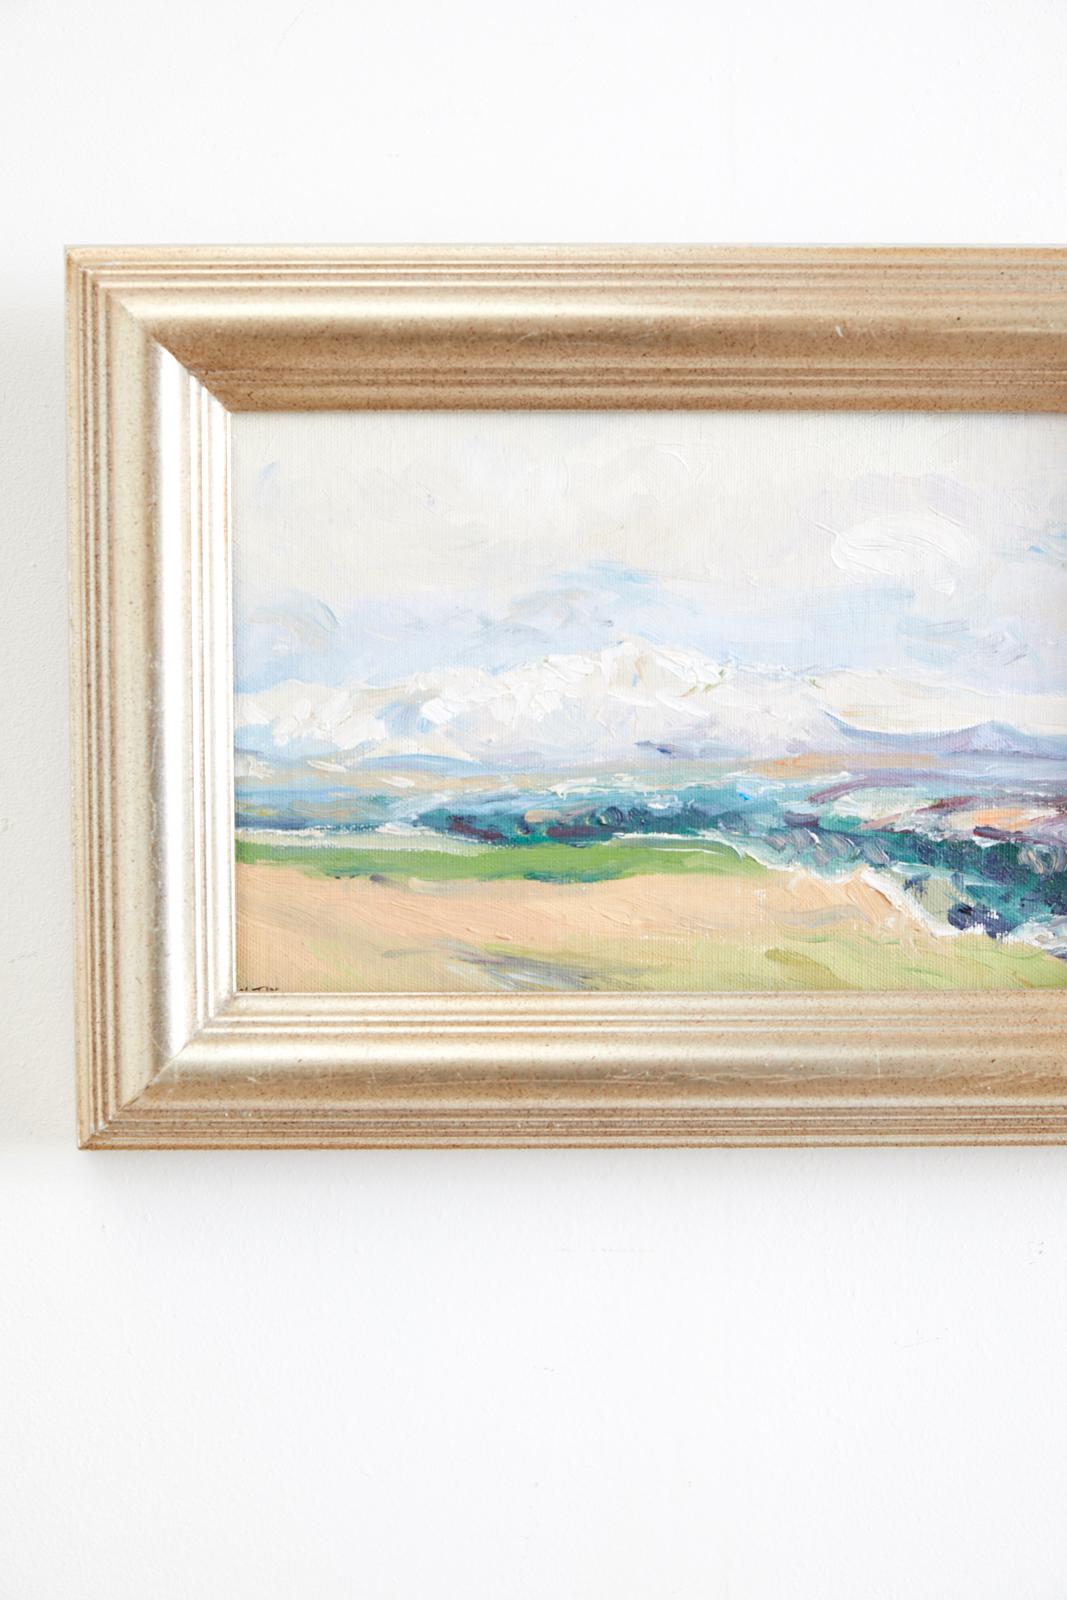 Charming oil on canvas painting of an abstract California landscape scene. Signed on bottom left Altay. Thick heavy brush strokes with lovely movement. Set in a silver gilt frame measuring 14.5 wide by 2 inches deep and 11 inches high. Frame covers